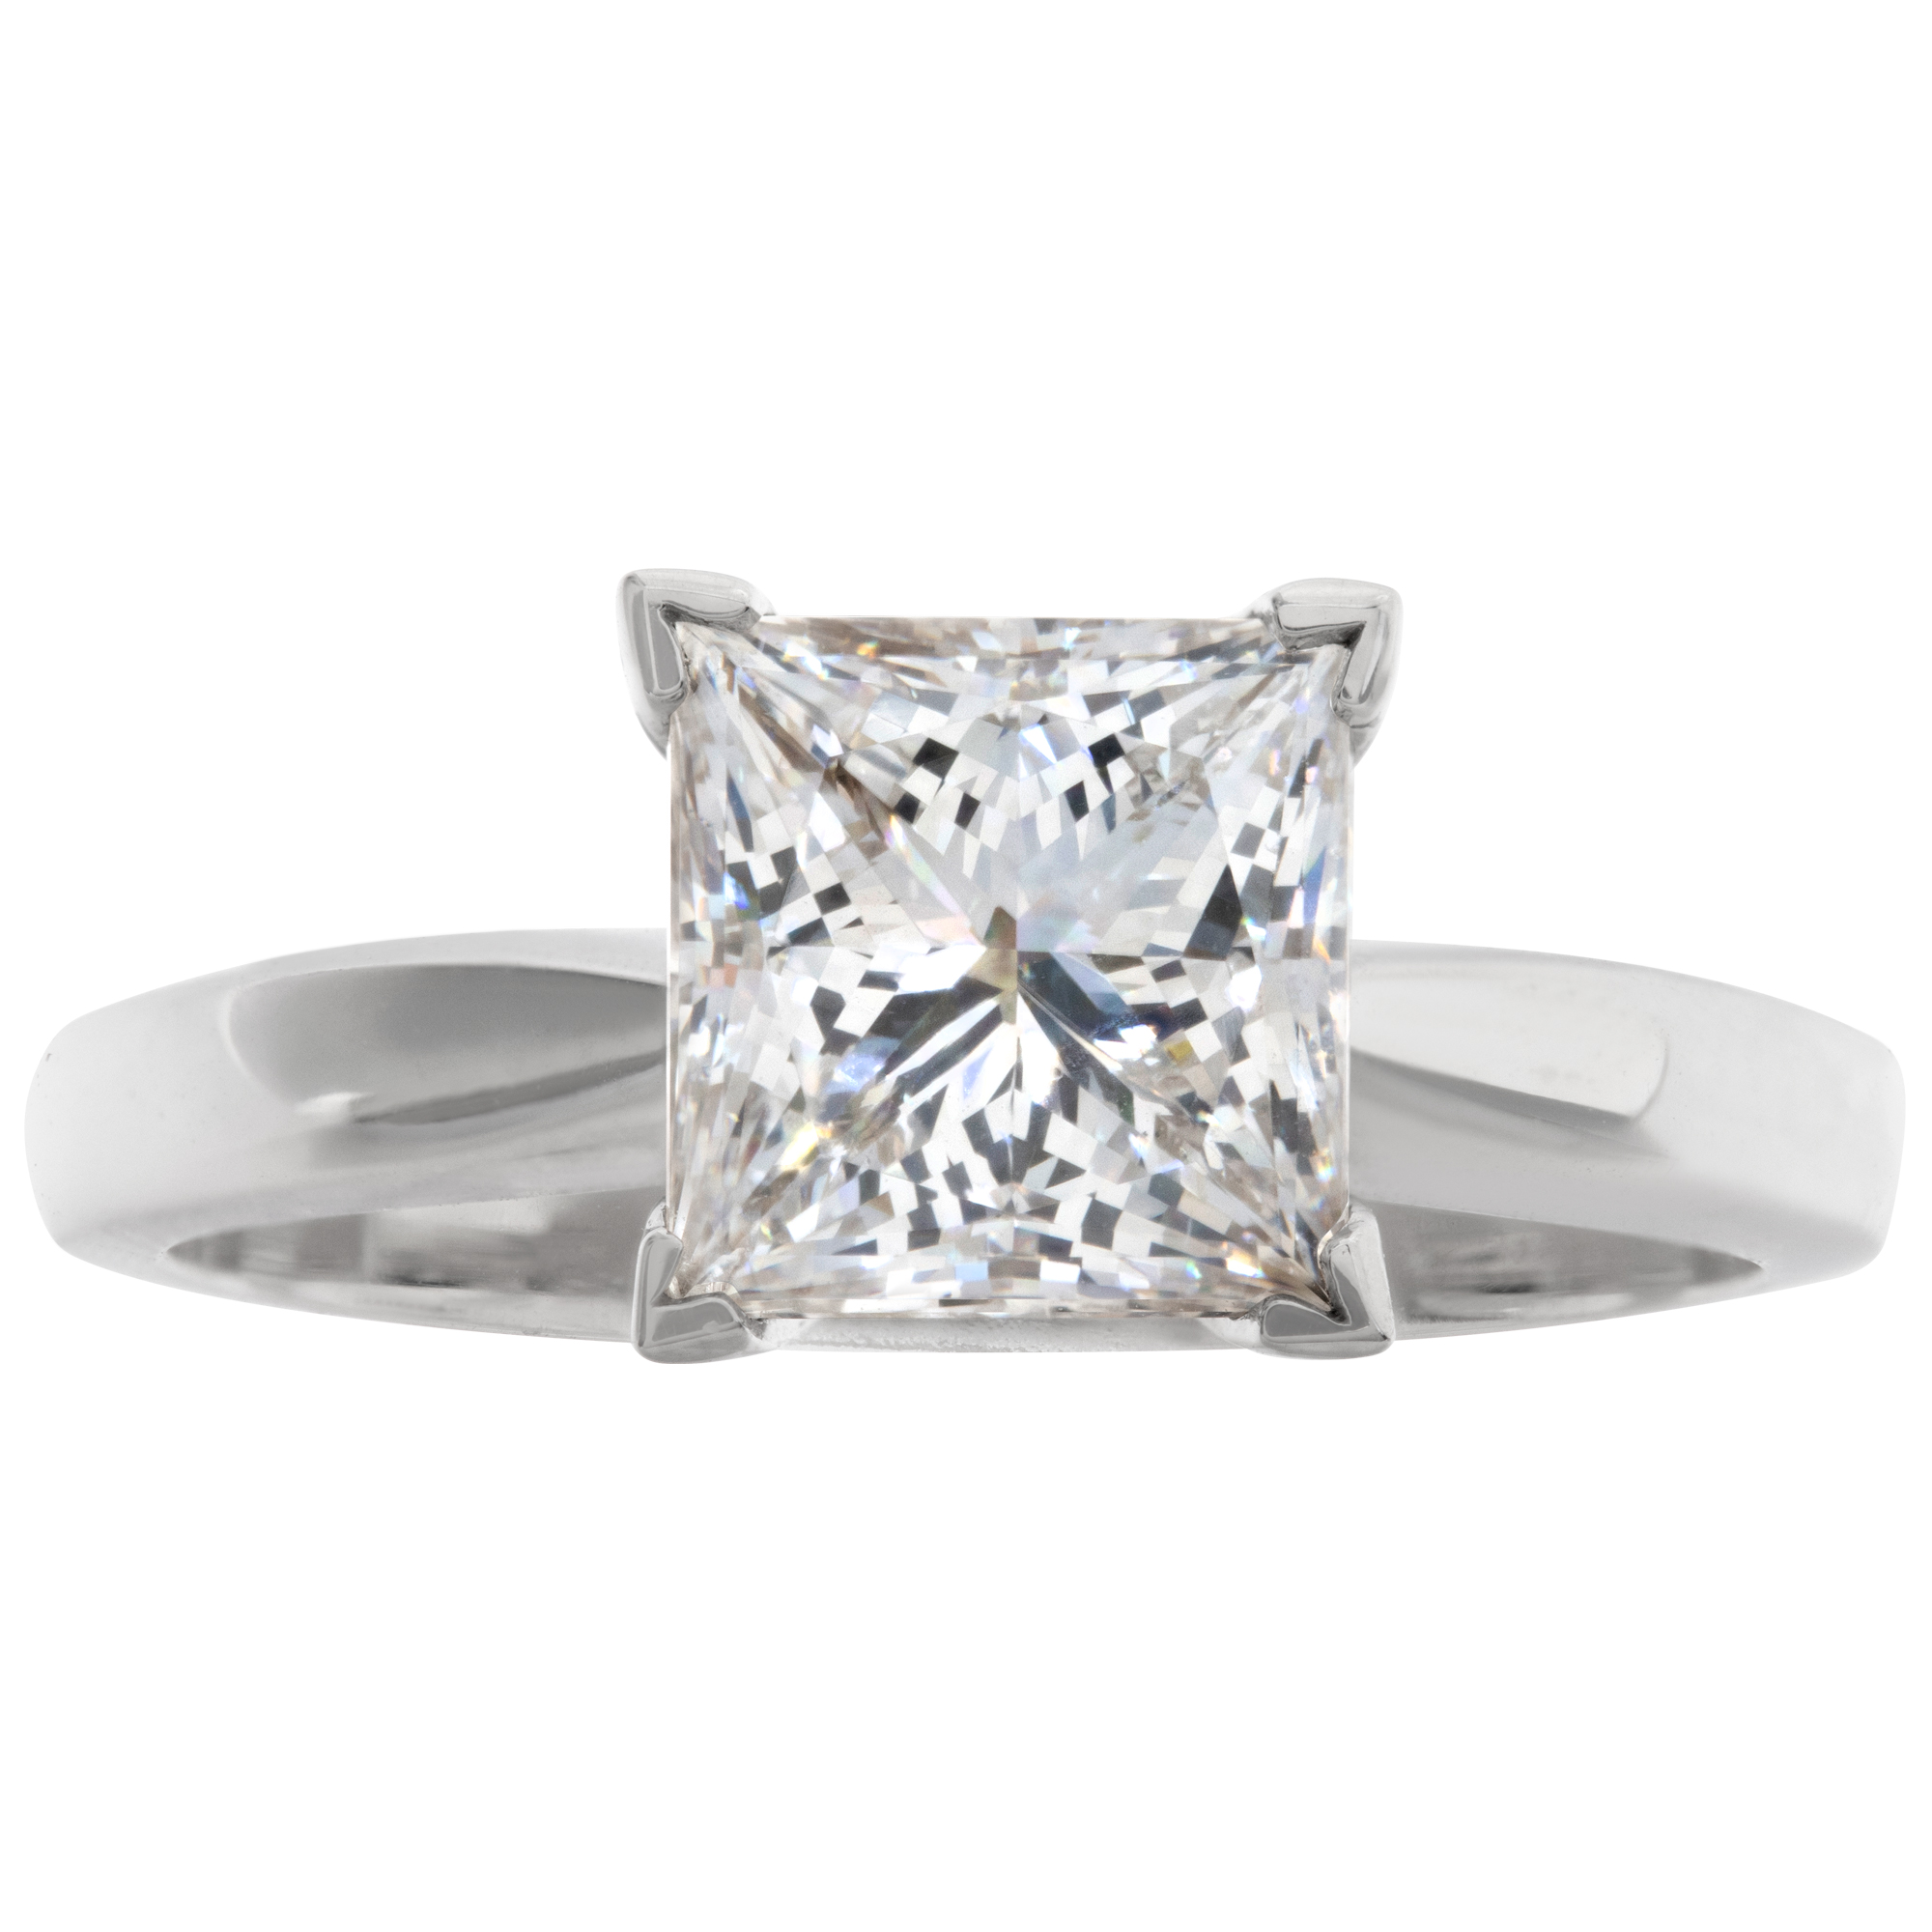 GIA certified princess cut diamond 2.09 carat (J color, SI1 clarity) solitaire ring (Stones)